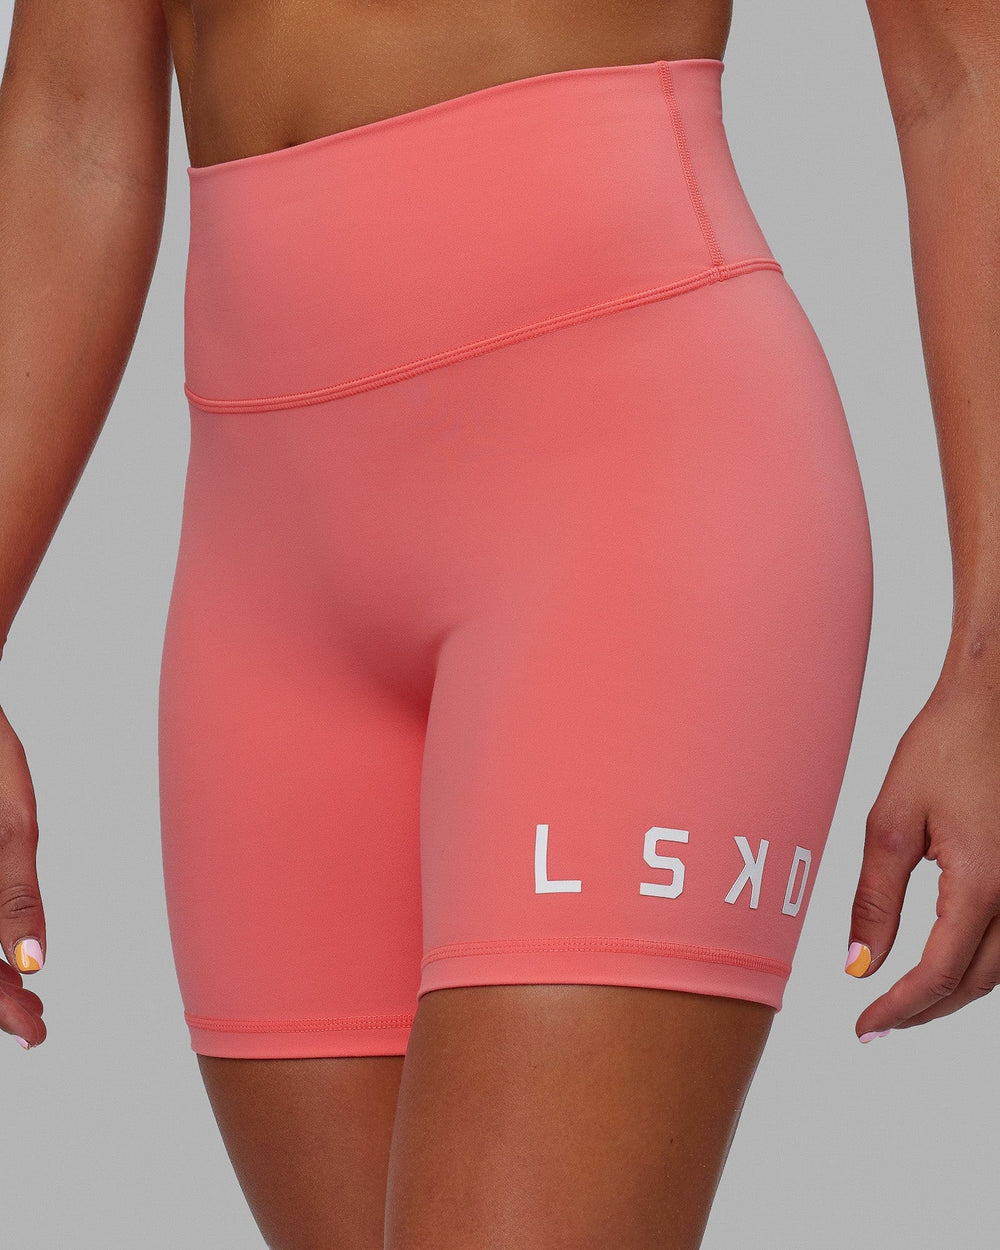 Woman wearing Evolved Mid Short Tight - Coral